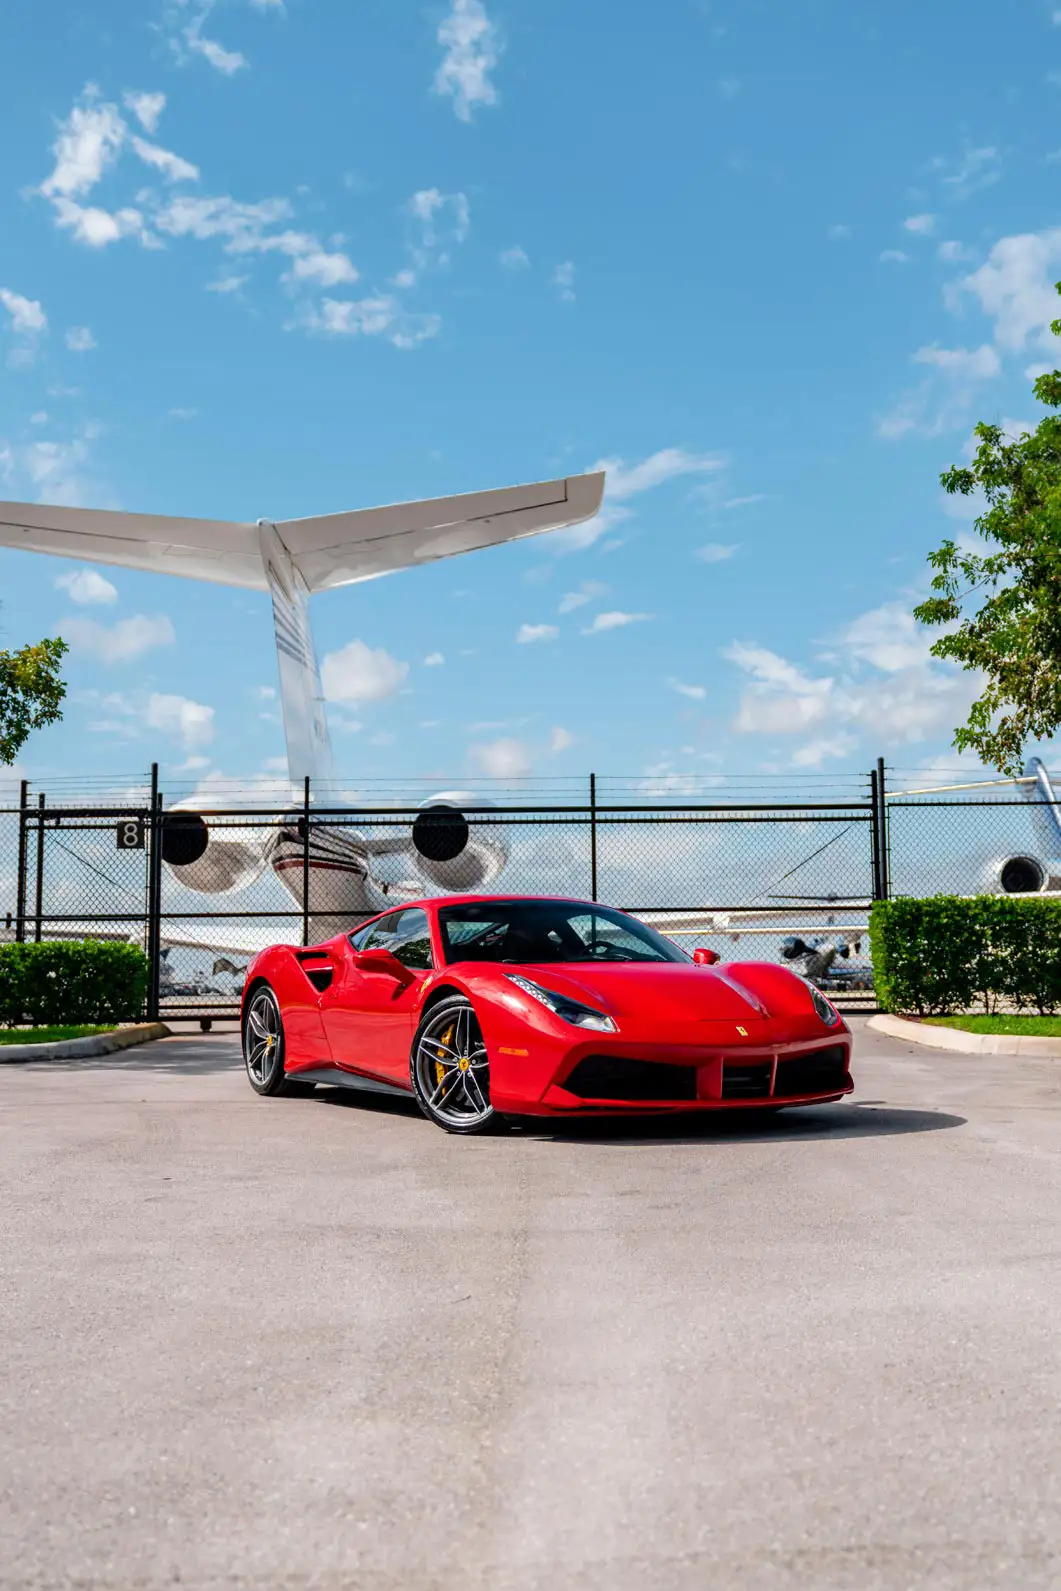 Ferrari 488 next to a private plane: the luxuriousness of the two industries create a respected reputation for business.